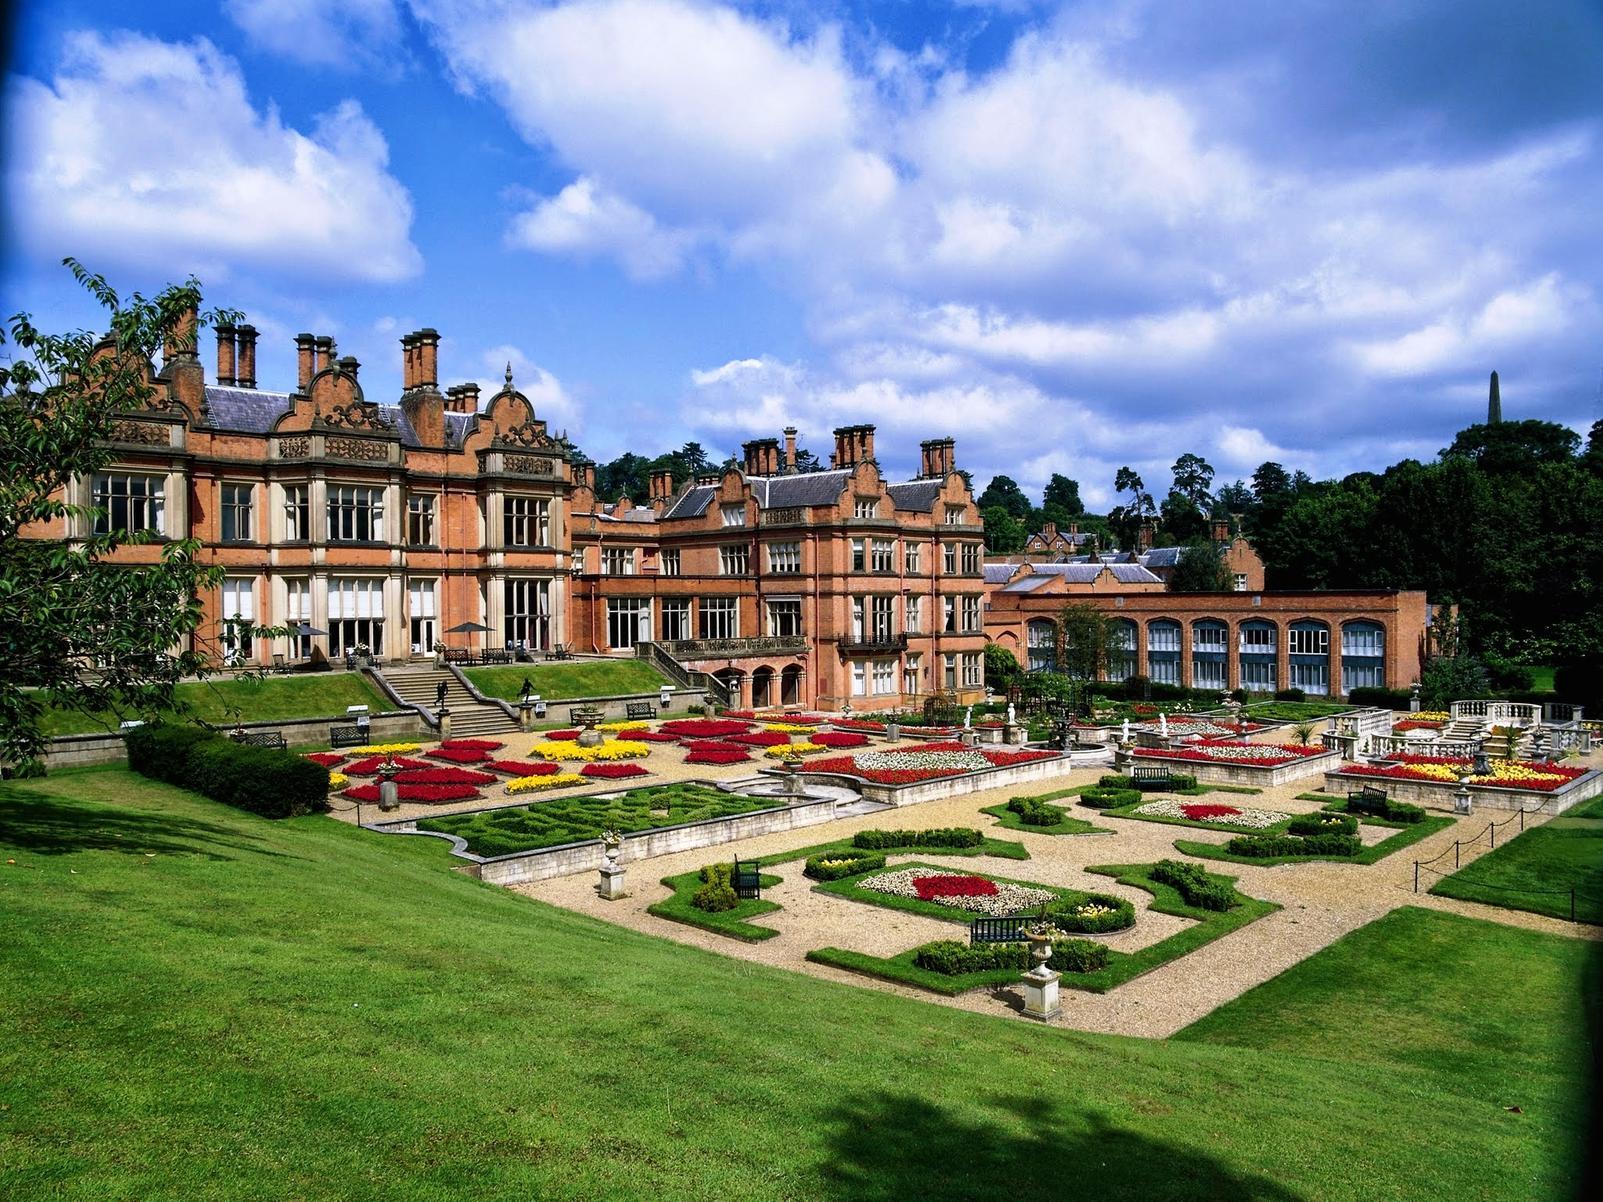 Located near Stratford Upon Avon, the 4-star Hallmark Hotel The Welcombe is a luxurious retreat set amongst more than 150 acres of landscaped grounds.